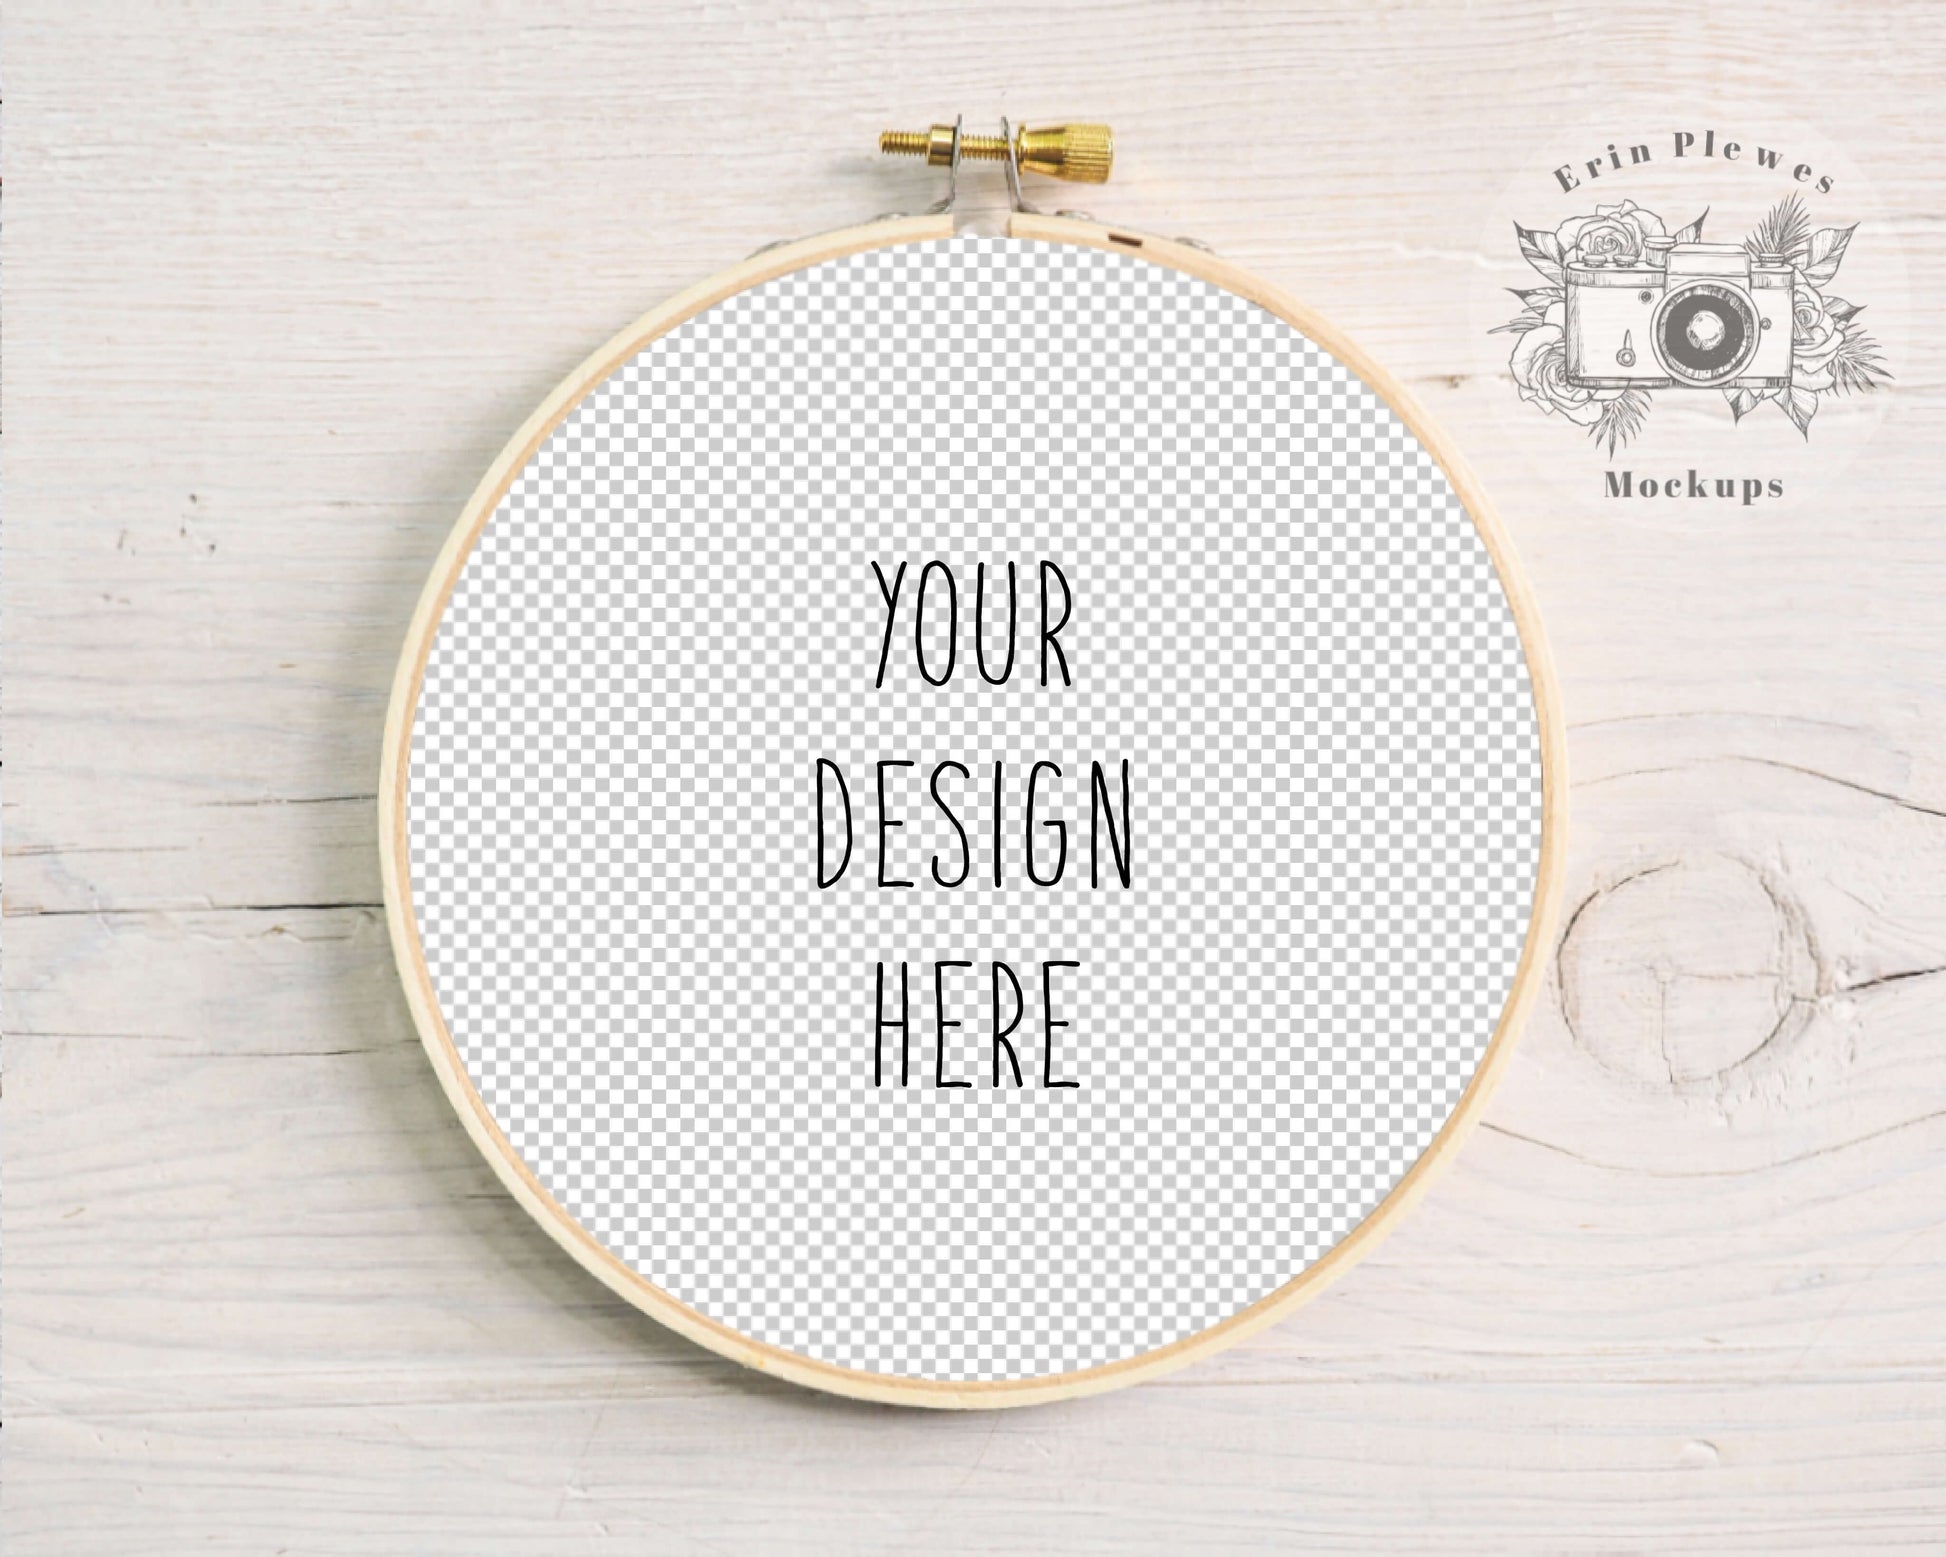 Embroidery hoop mockup on white rustic wood with transparent circle